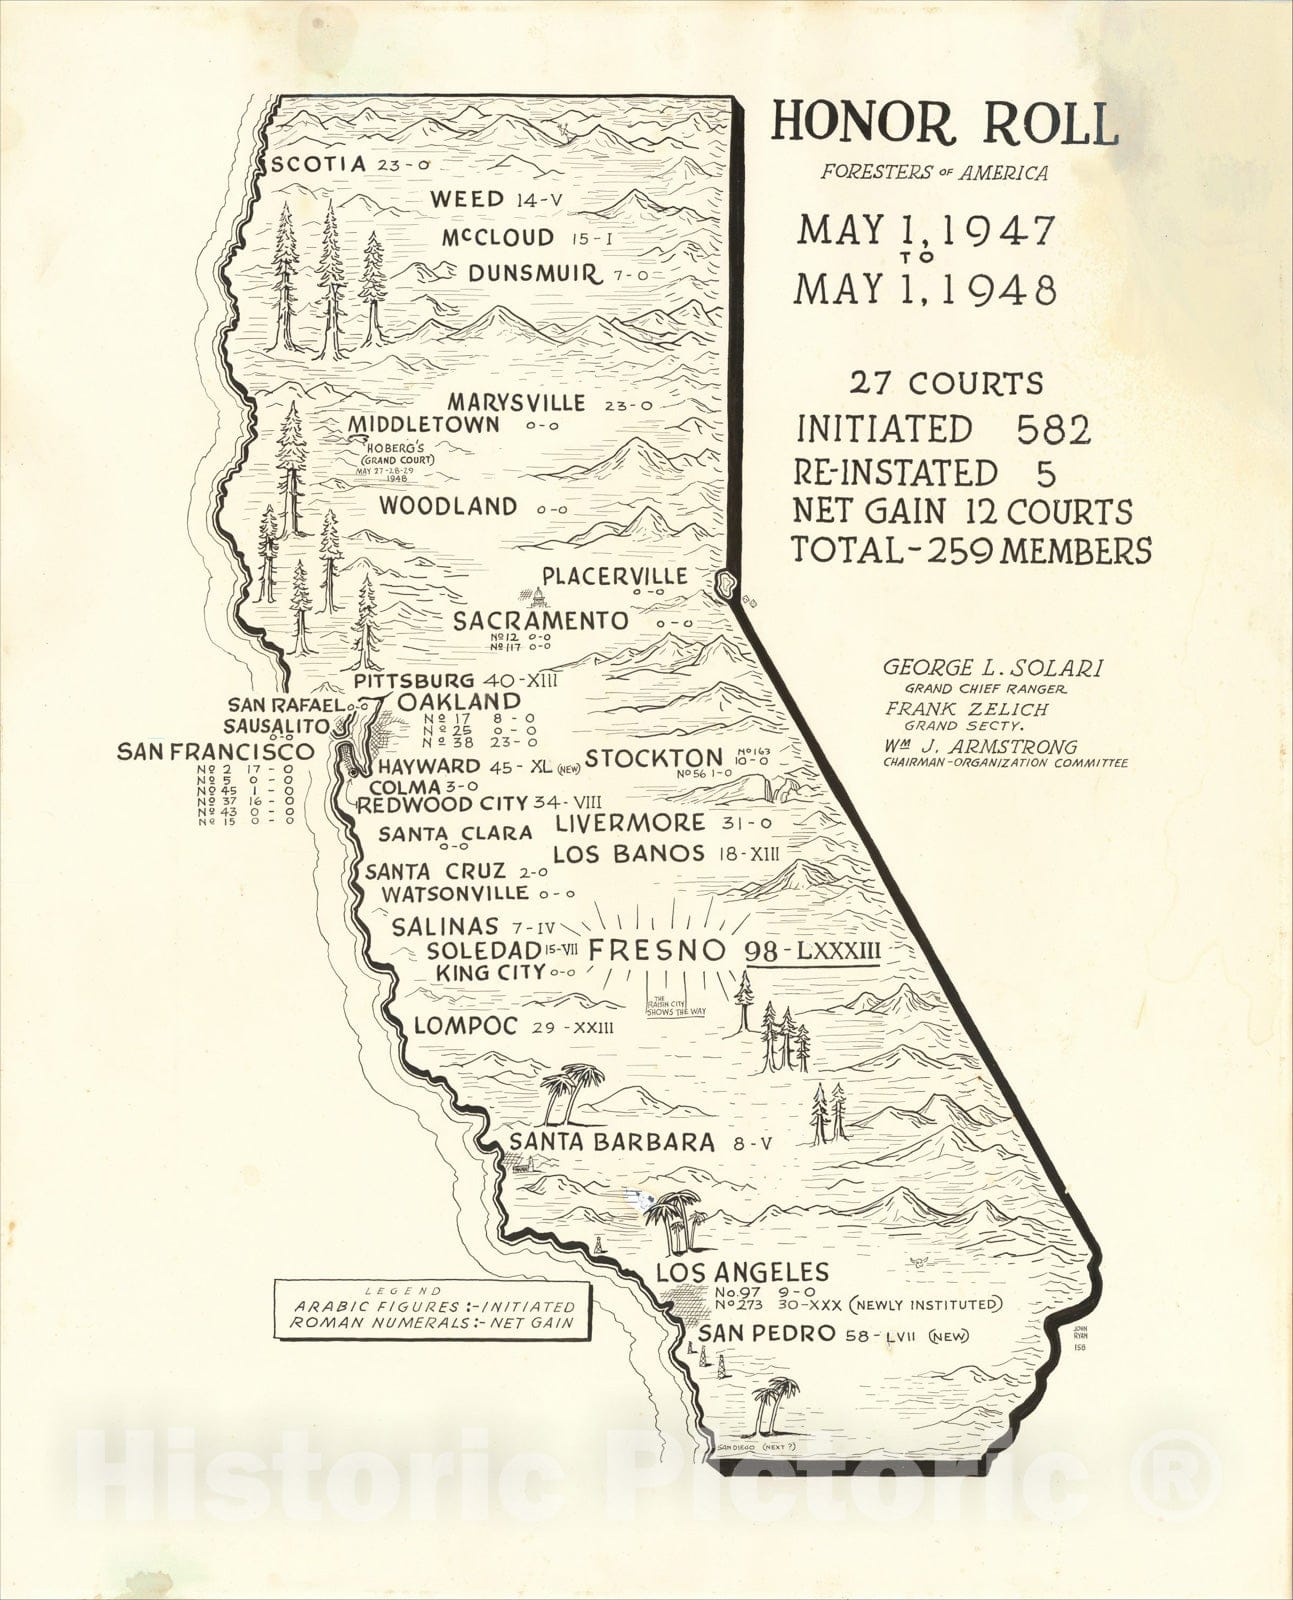 Historic Map : [California] Honor Roll Foresters of America May 1, 1947 to May 1, 1948, c1948, John Ryan, Vintage Wall Art